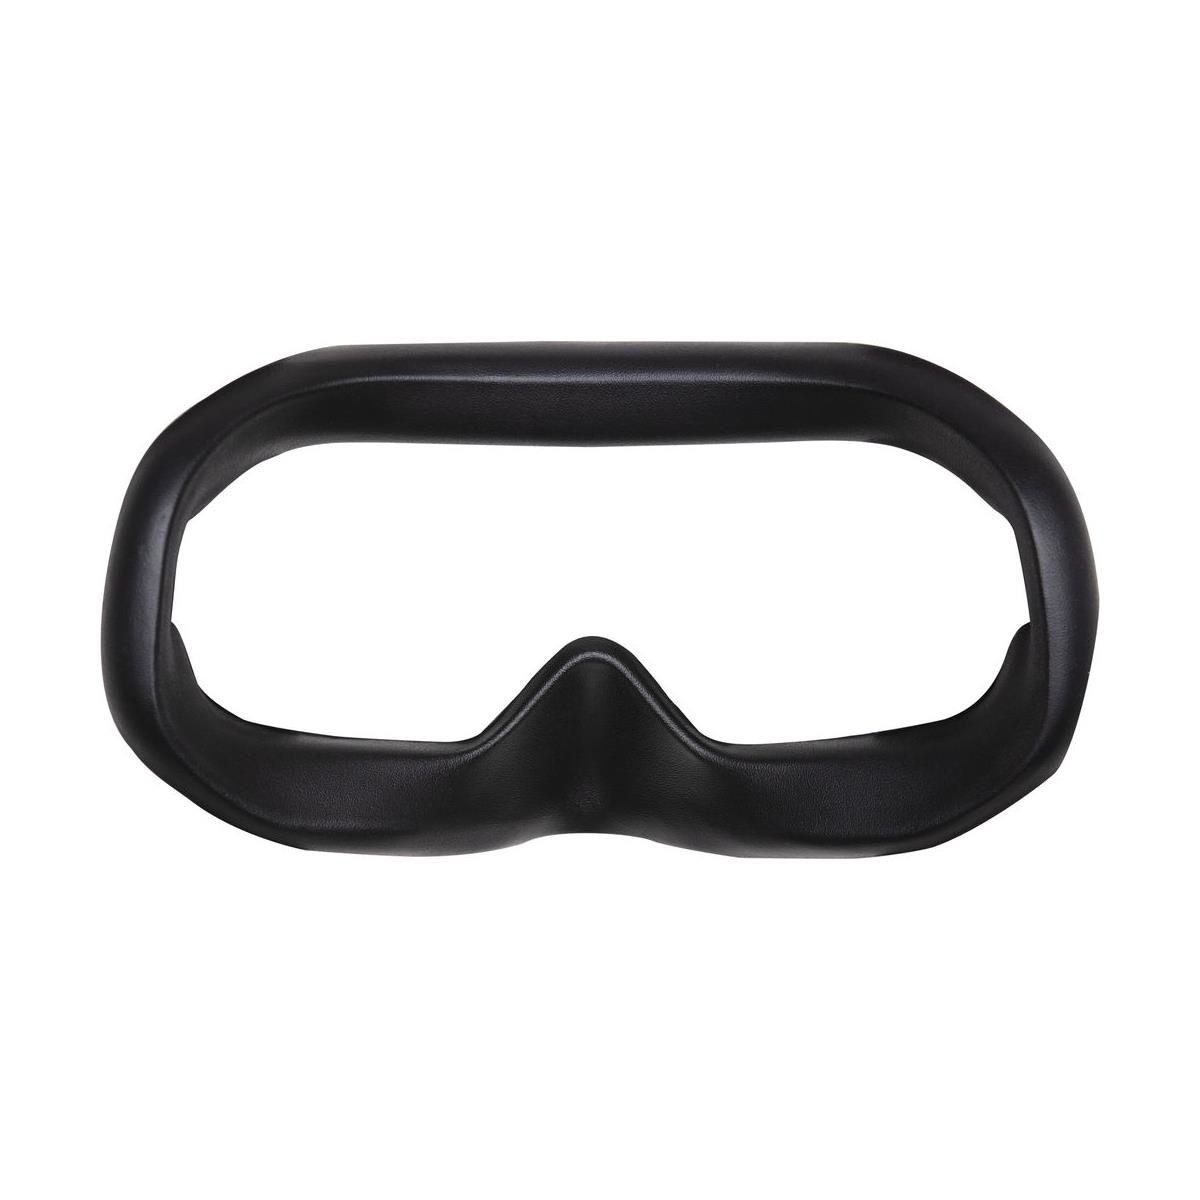 Image of DJI Part 13 Foam Padding for FPV Goggles